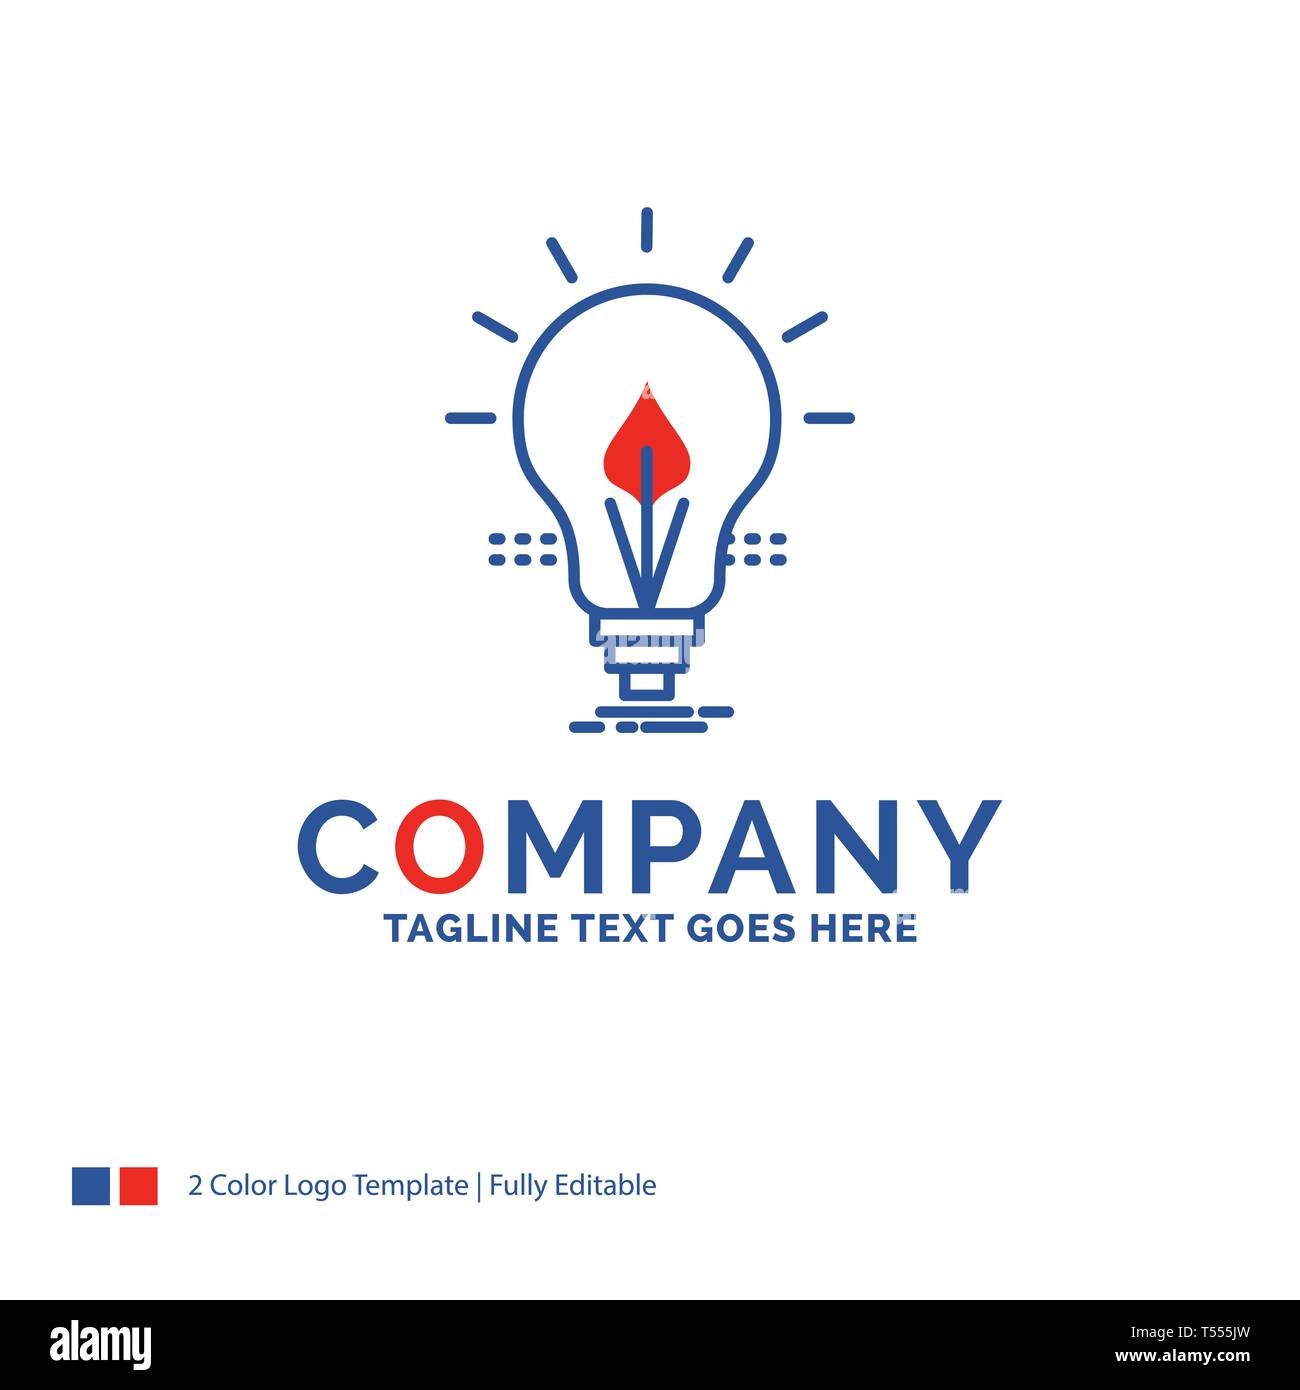 Company Name Logo Design For bulb, idea, electricity, energy, light. Blue and red Brand Name Design with place for Tagline. Abstract Creative Logo tem Stock Vector